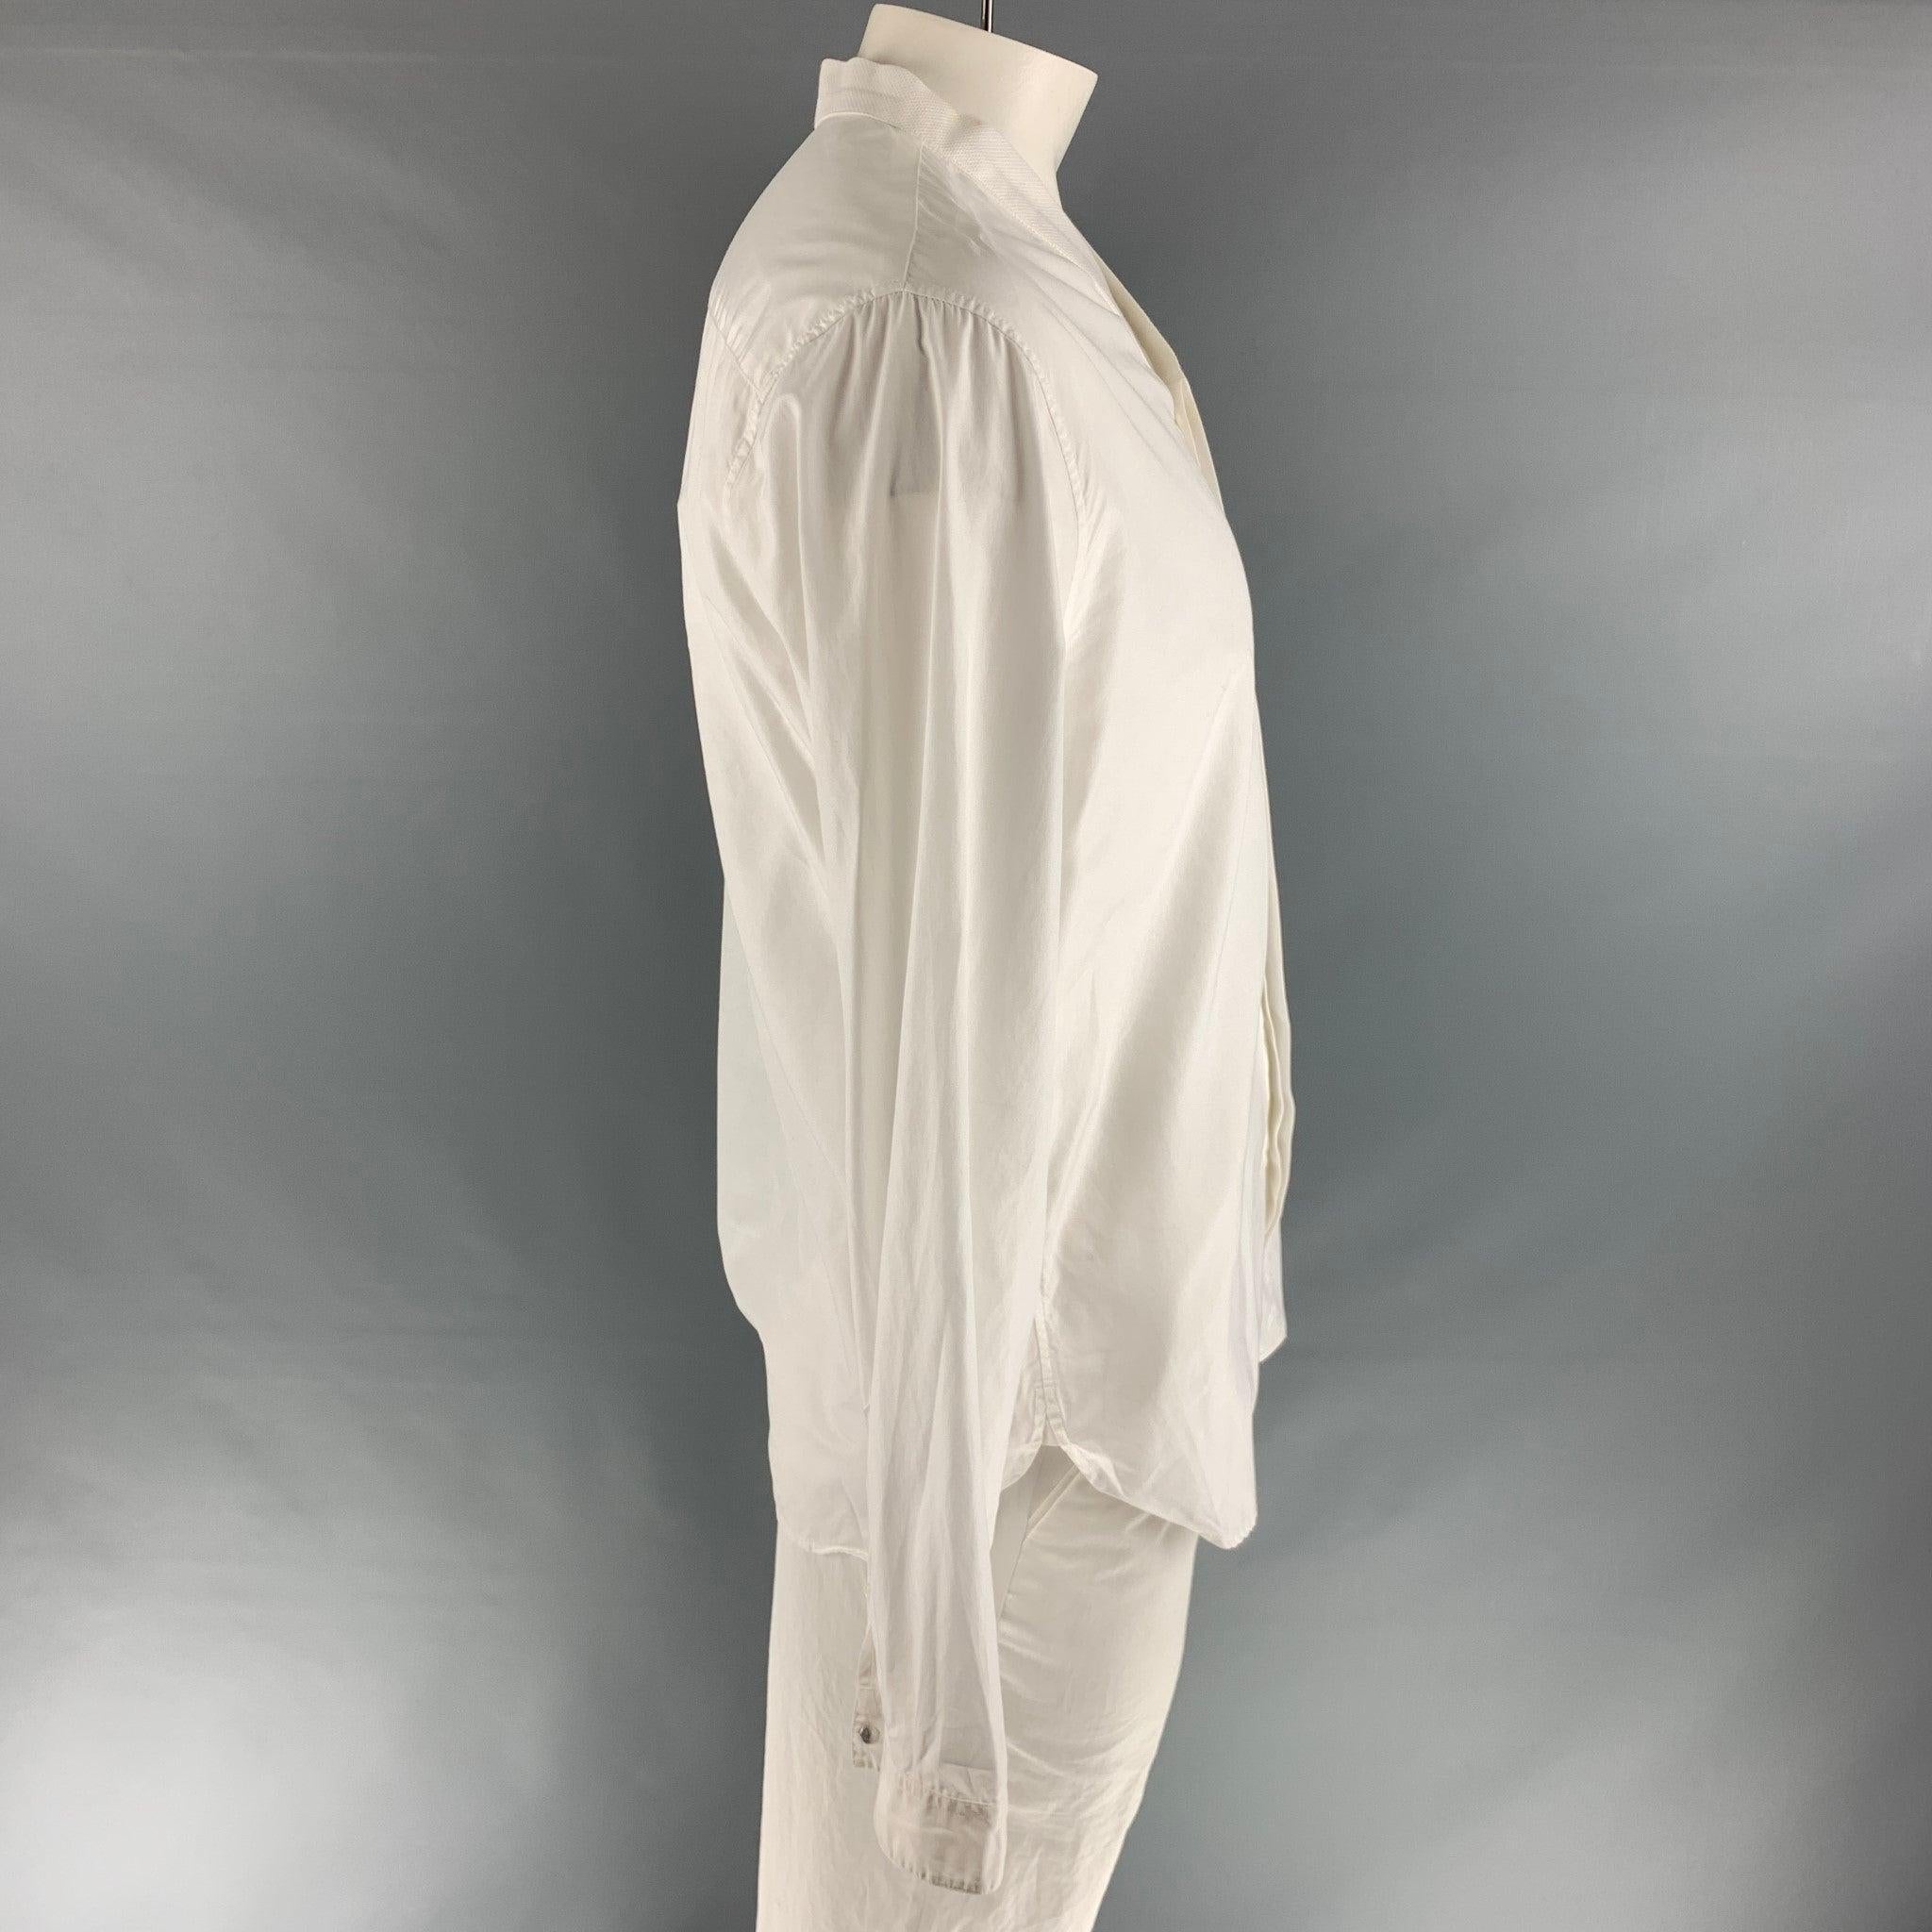 THE KOOPLES long sleeve shirt comes in a white cotton featuring a slim fit, open deep collar, and hidden placket. Made in Italy.Very Good Pre-Owned Condition. 

Marked:   XL 

Measurements: 
 
Shoulder: 20 inches Chest: 40 inches Sleeve: 26 inches